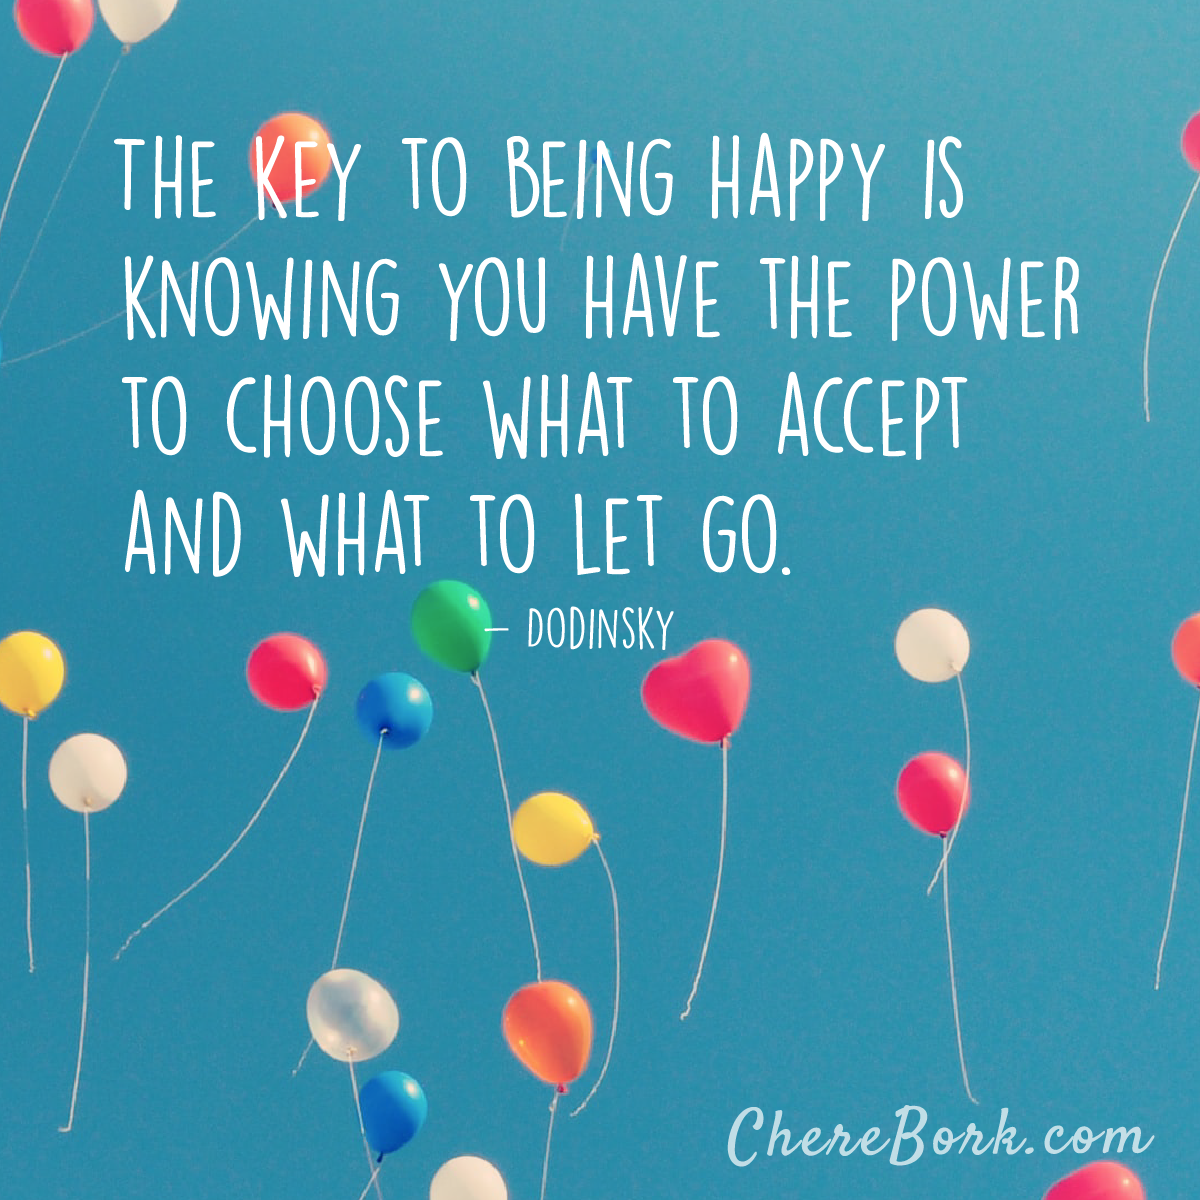 The key to being happy is knowing you have the power to choose what to accept and what to let go. -Dodinsky